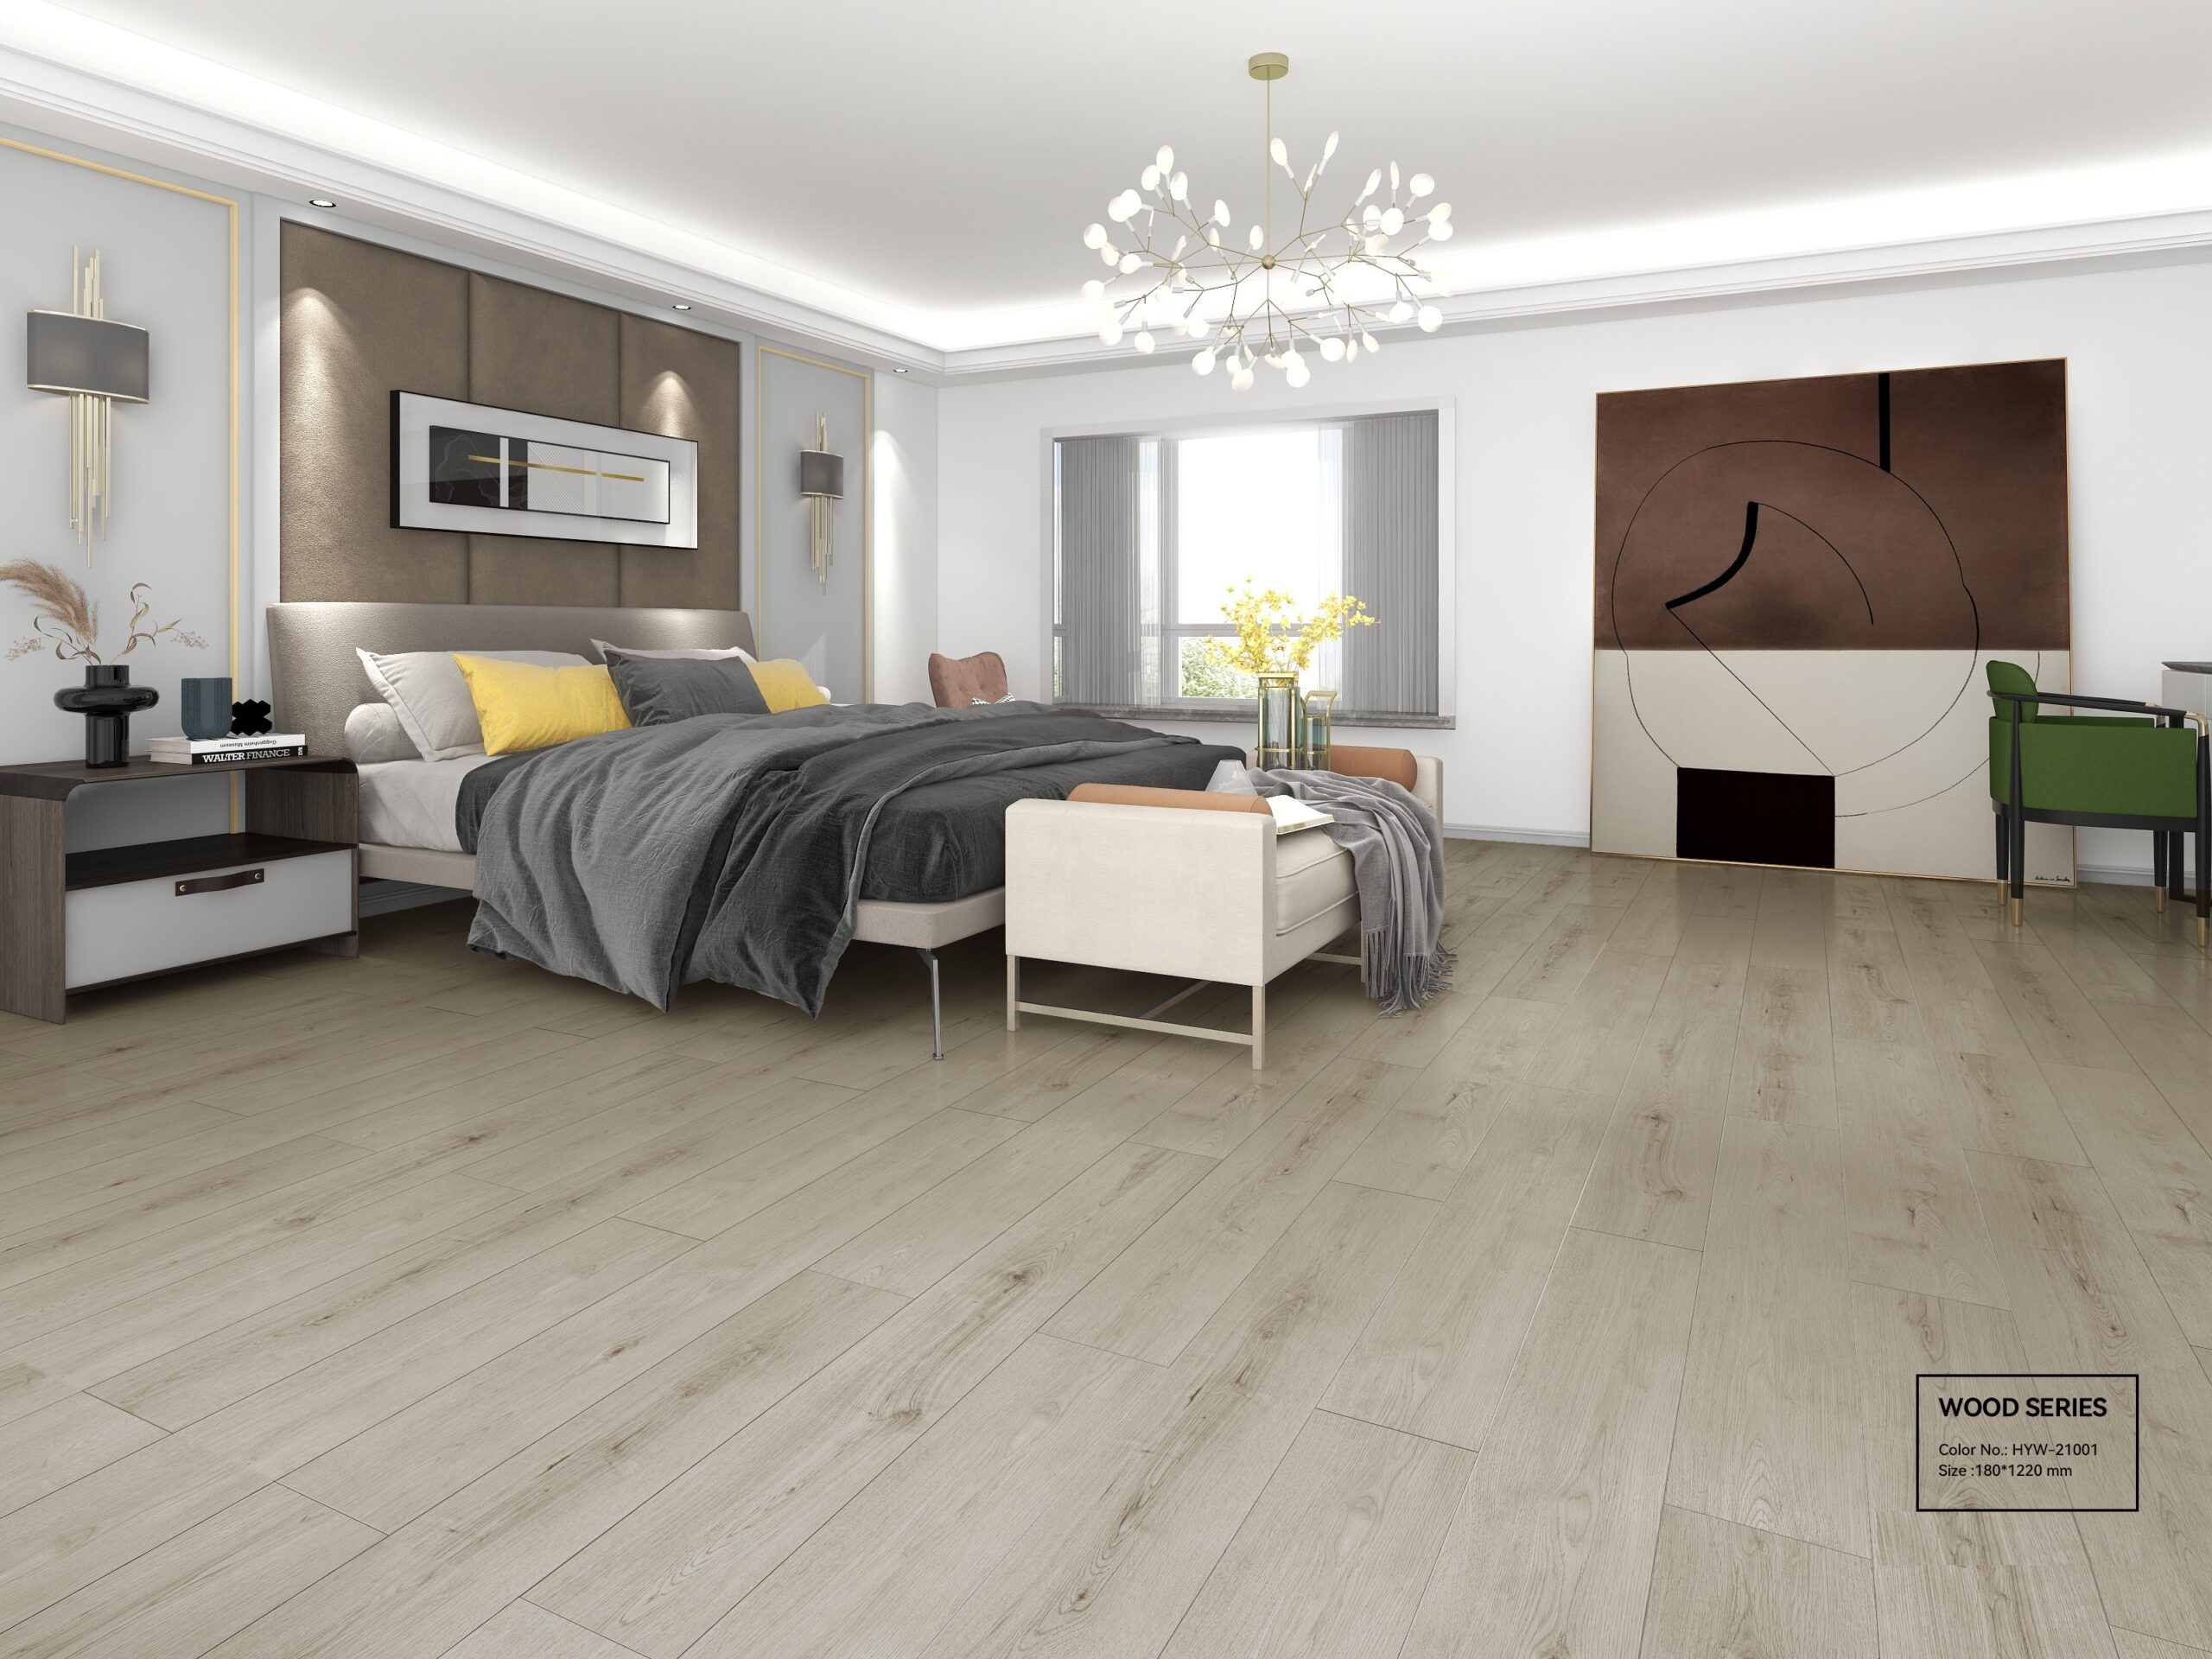 a large bedroom with wooden SPC flooring in neutral tone